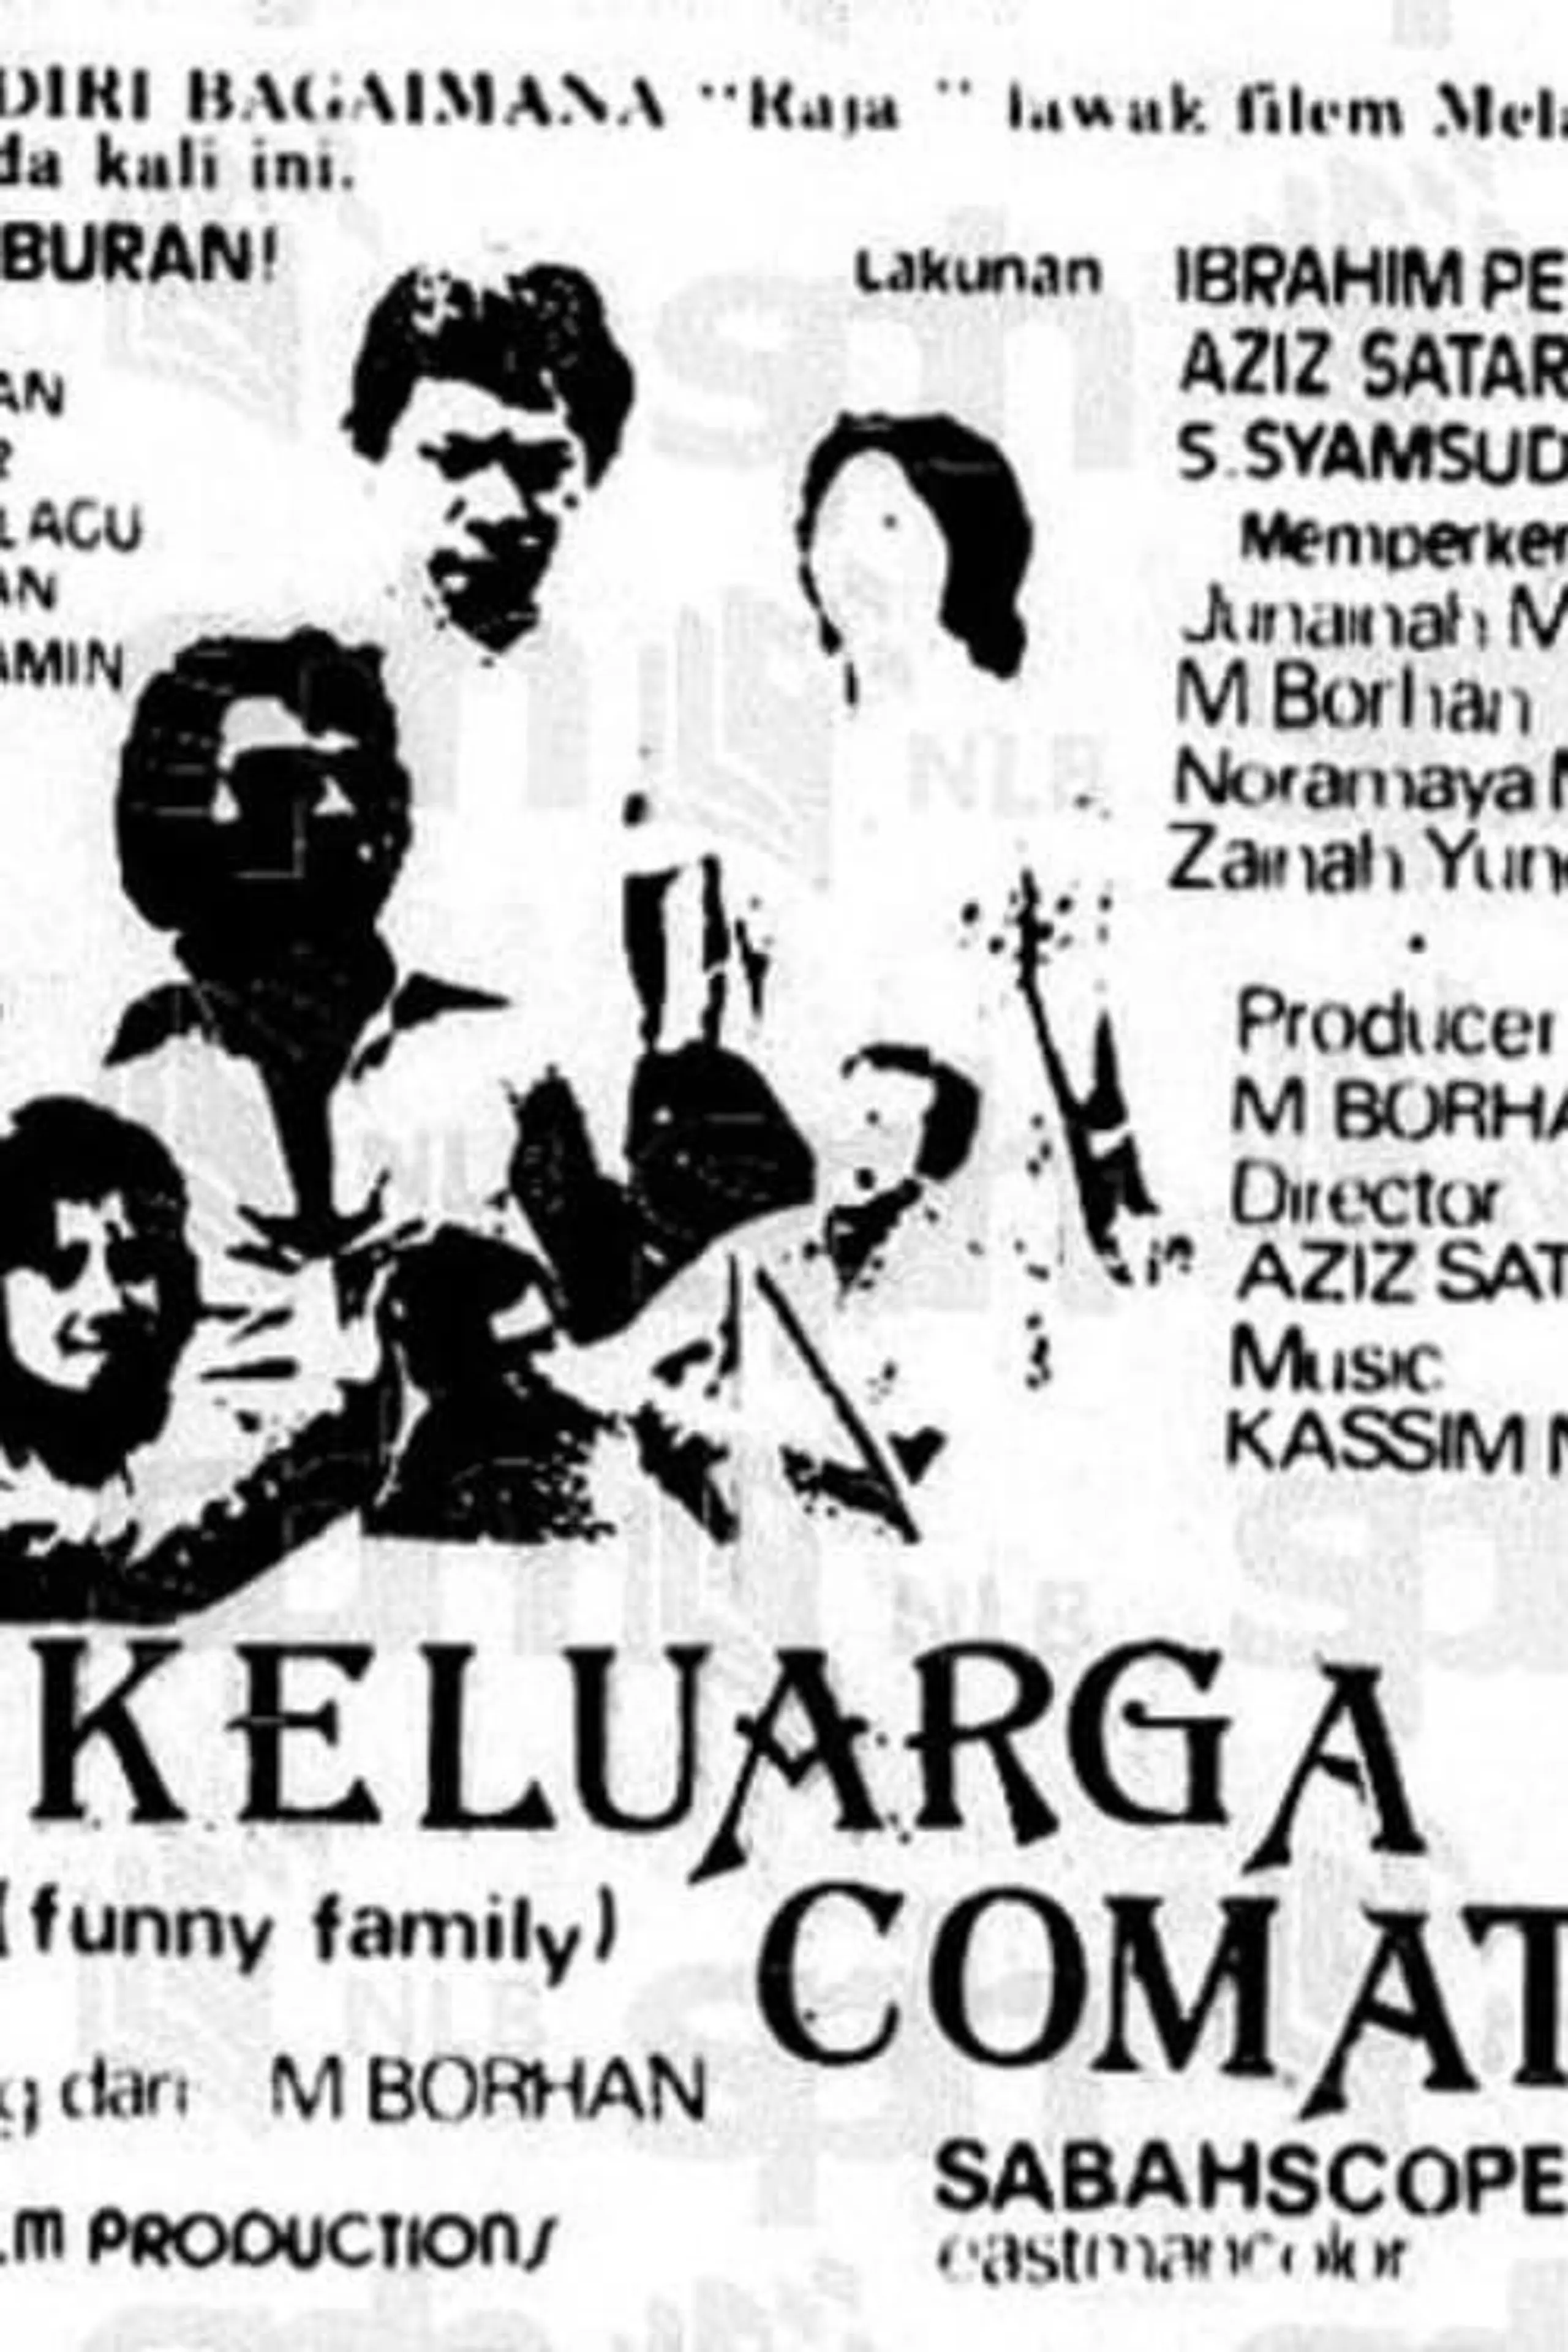 Si Comat's Family (1975)